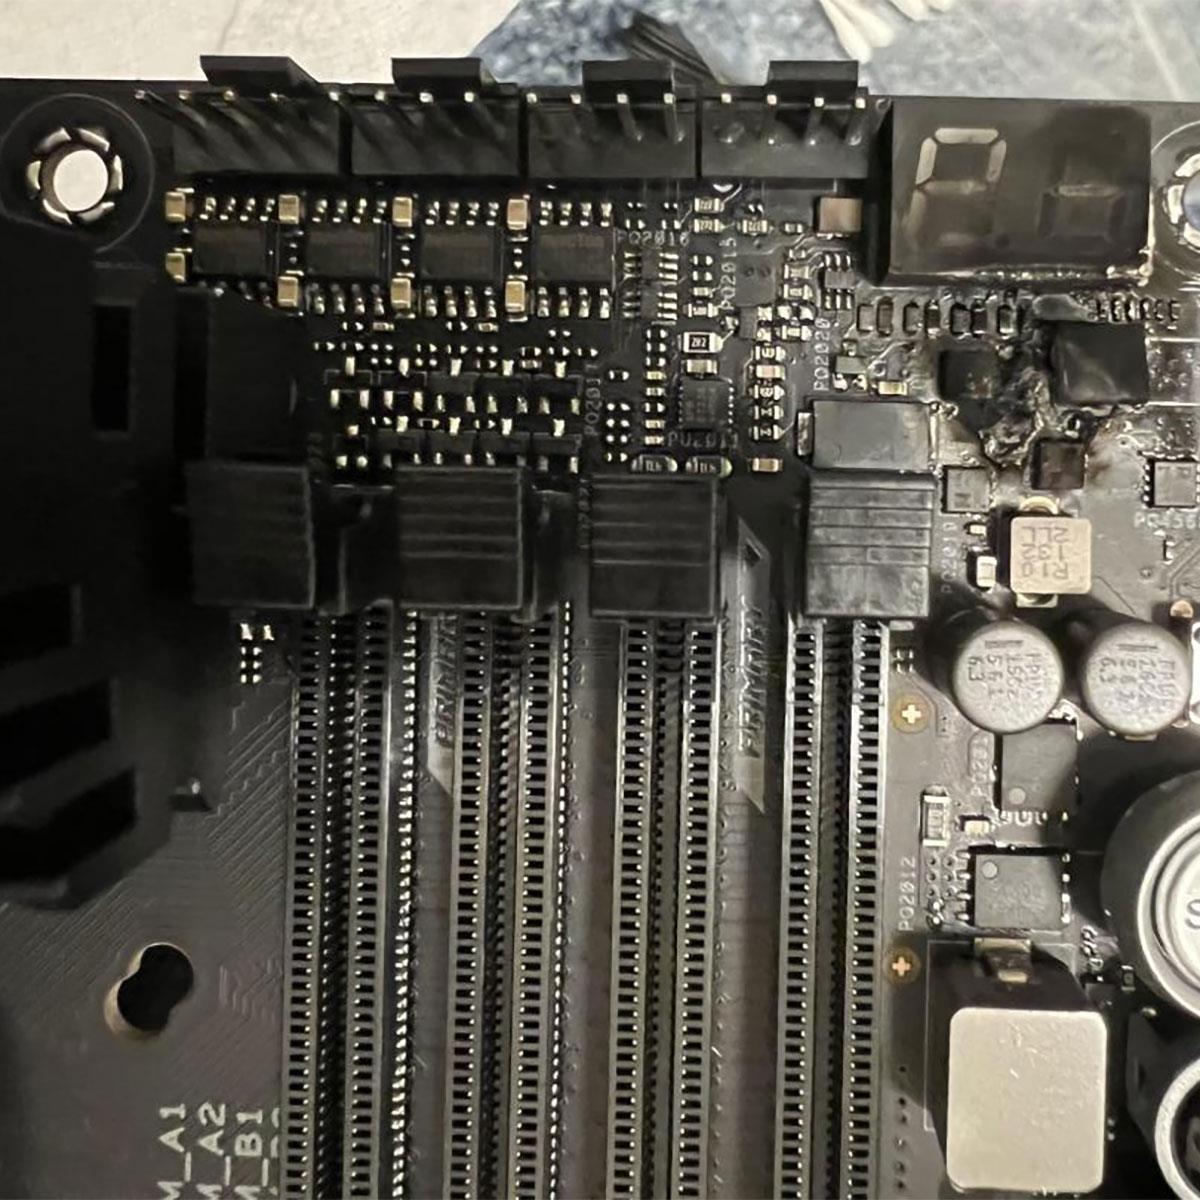 ASUS Confirms Backwards Caps Are To Blame For ROG Maximus Z690 Motherboards Burning Up